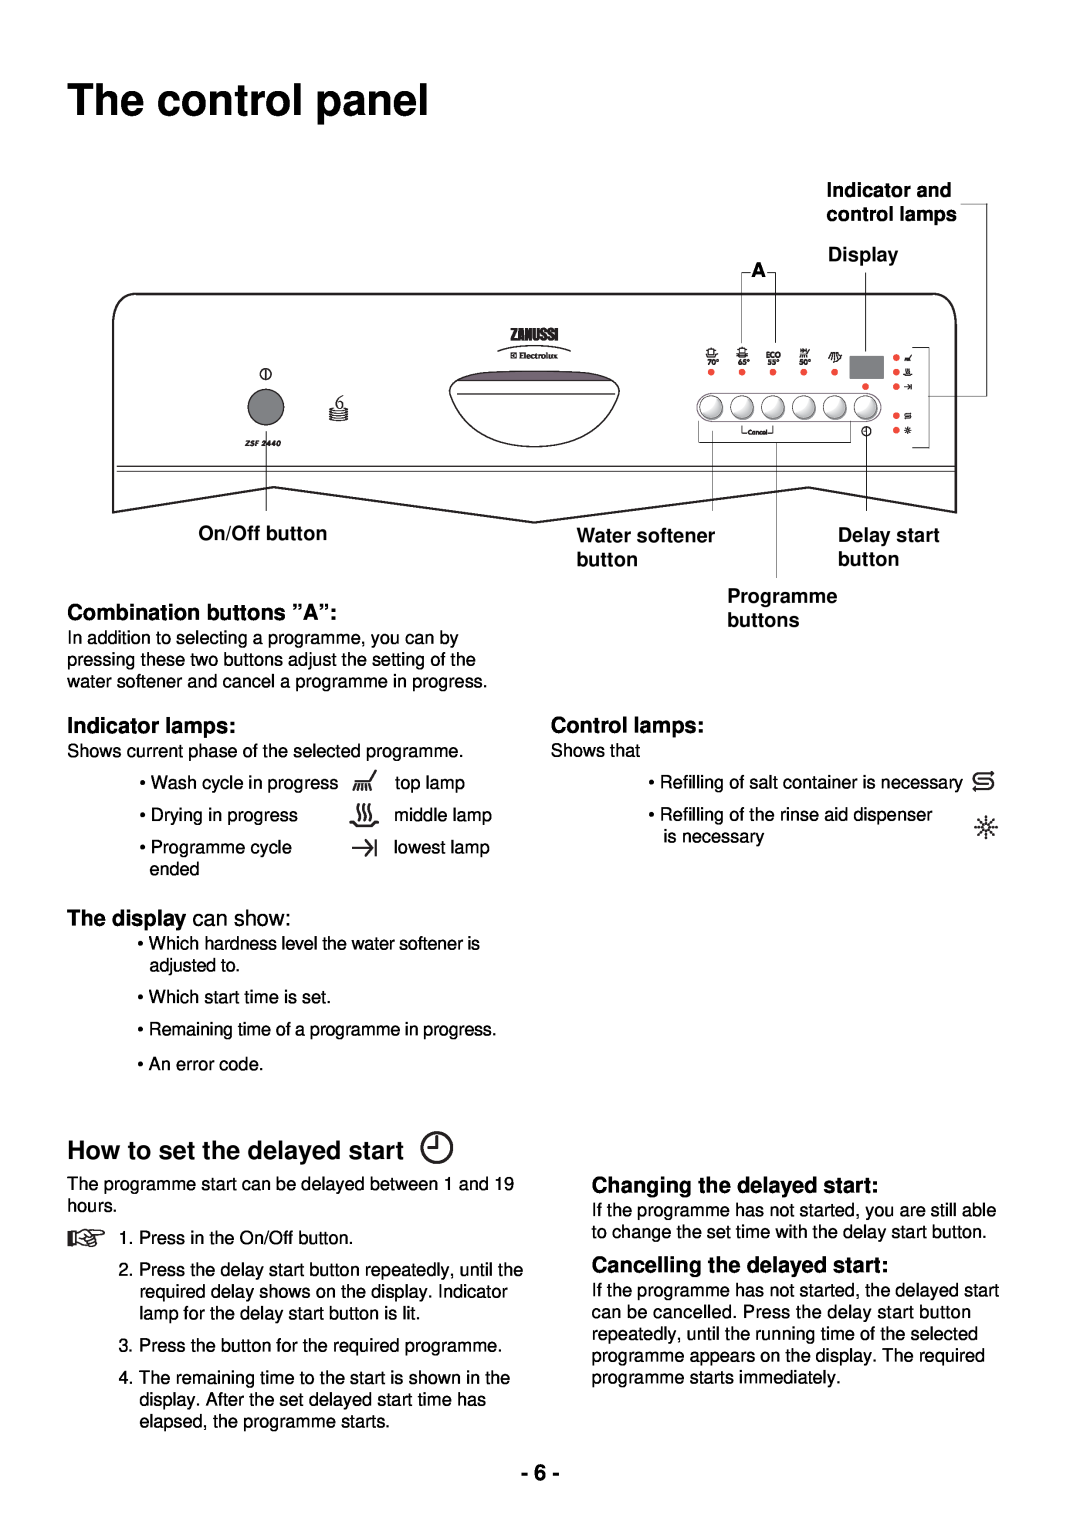 Zanussi ZSF 2440 The control panel, How to set the delayed start, Combination buttons ”A”, Indicator lamps, Control lamps 